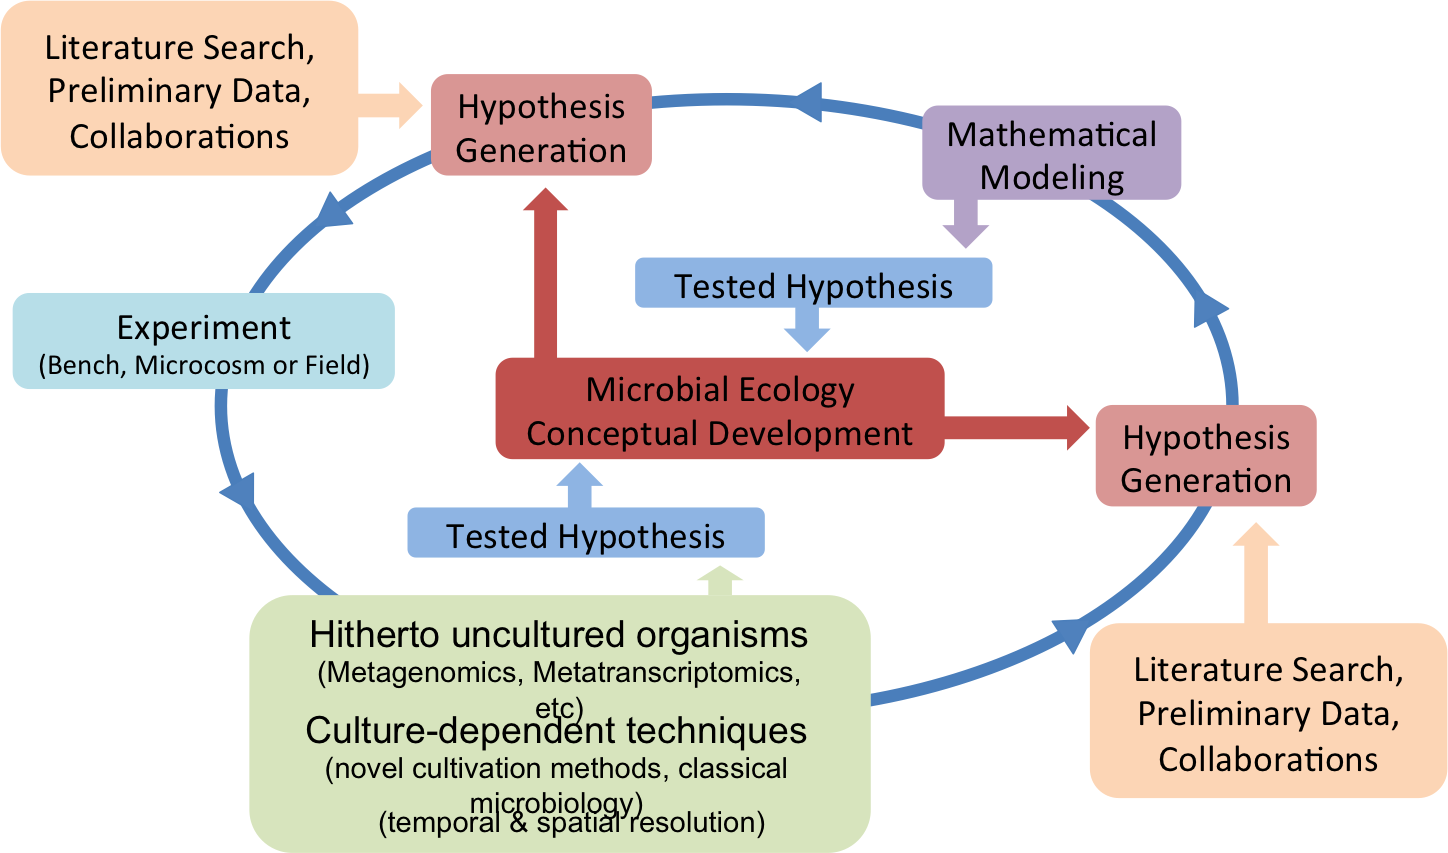 Community Systems Biology approach addressing conceptual development in Microbial Ecology.